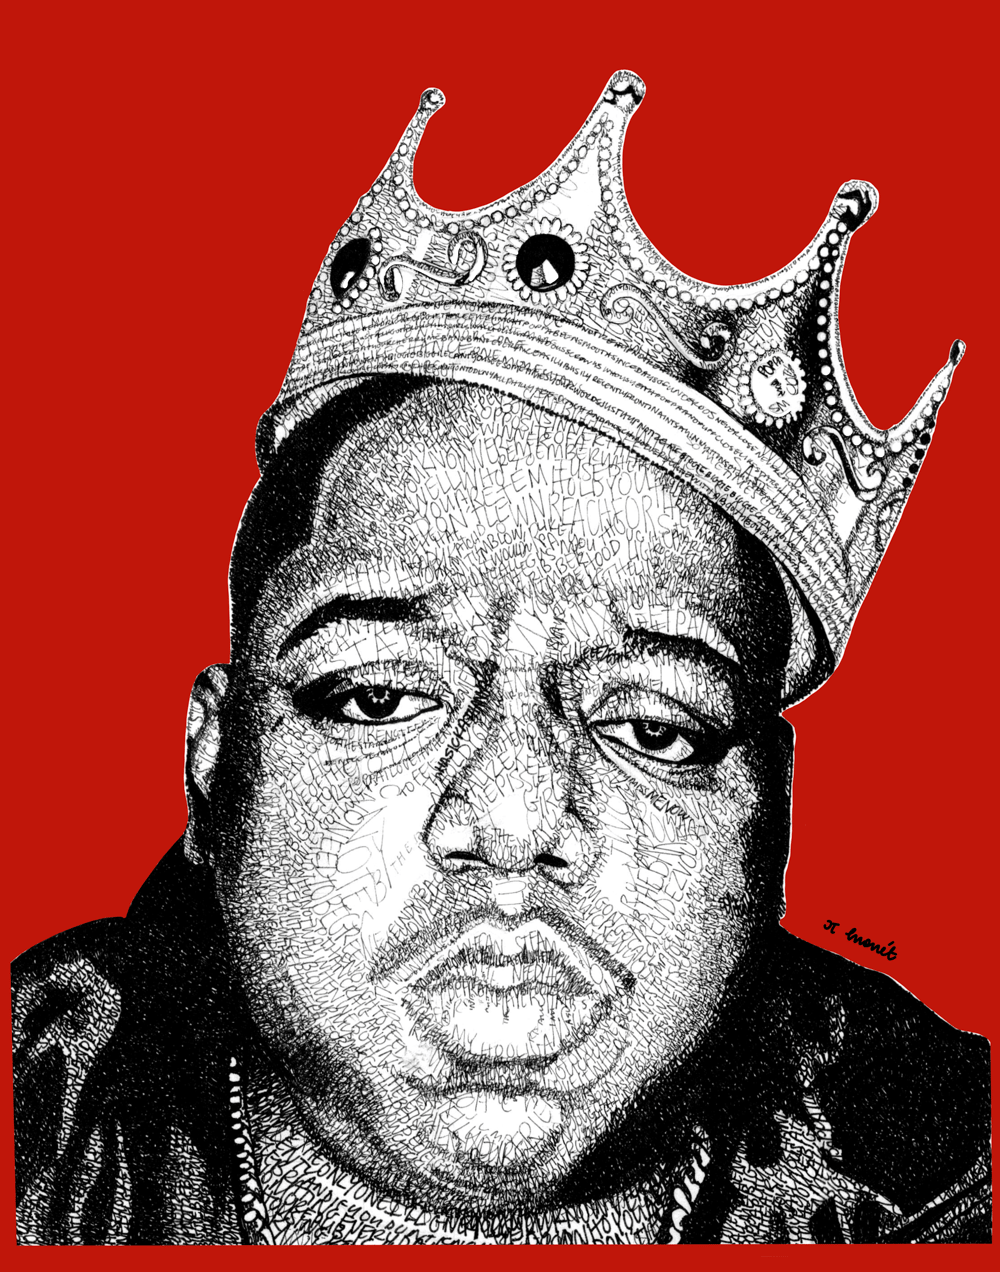 Image of Notorious B.I.G.